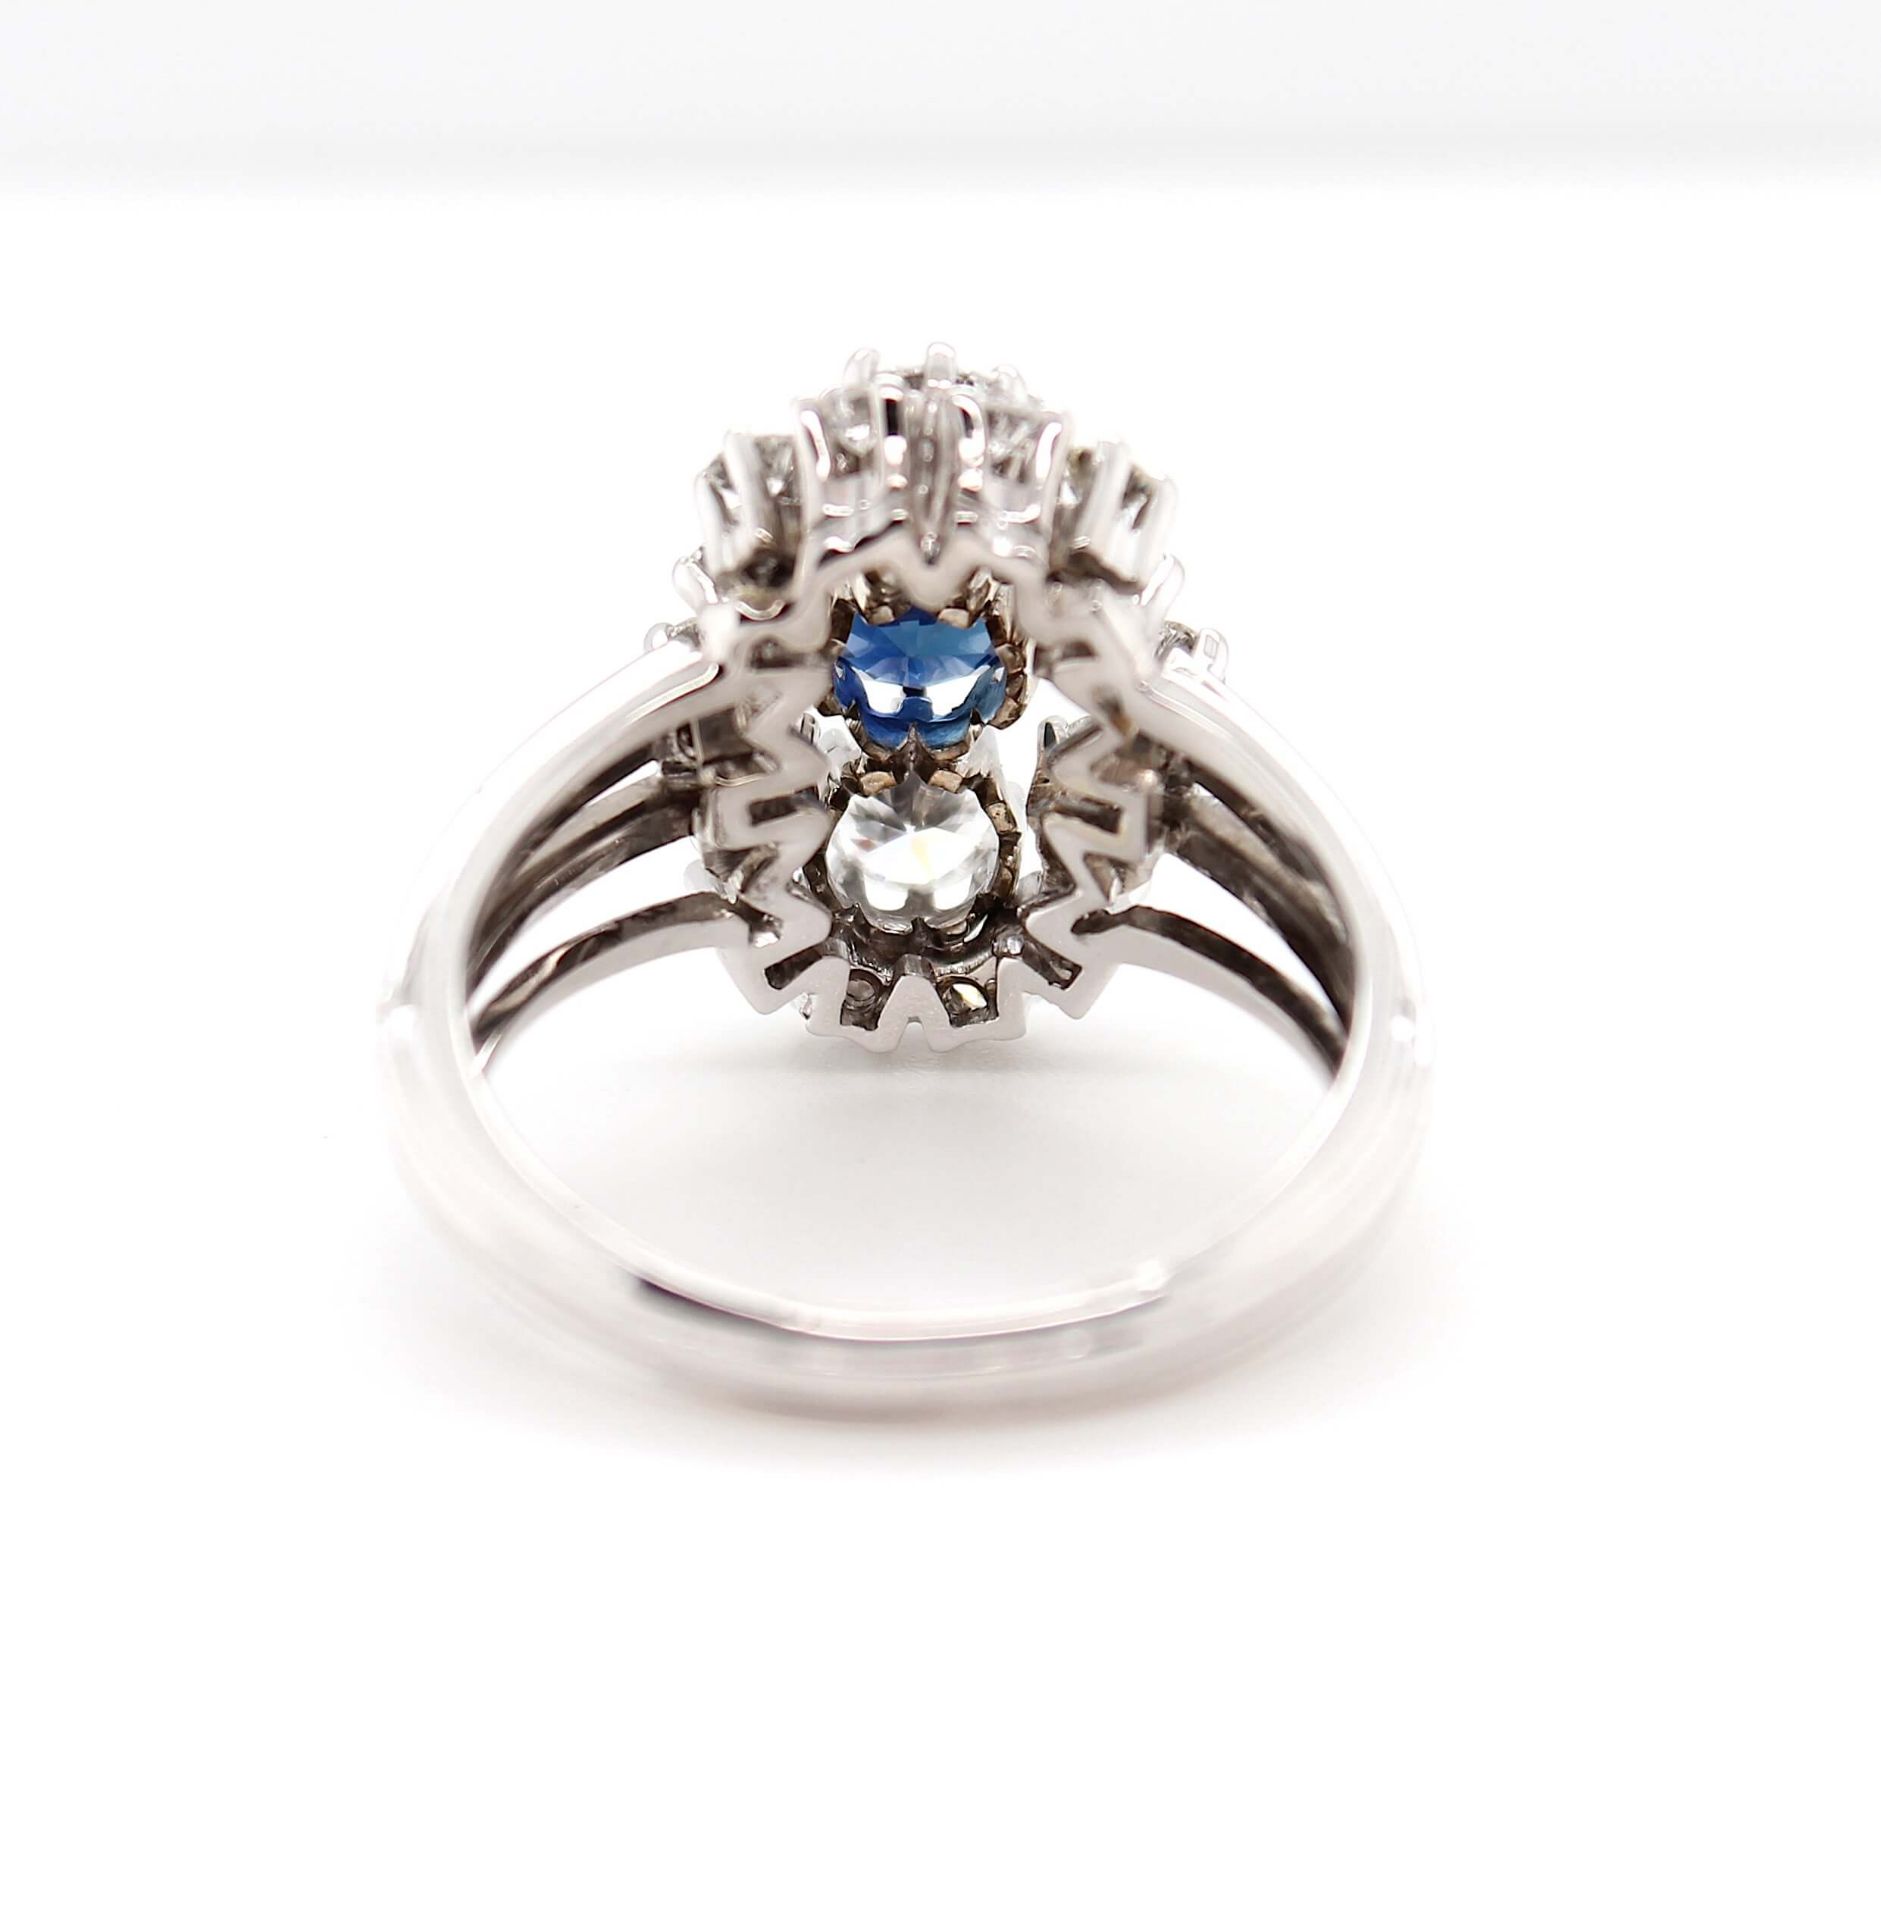 Ring with one sapphire and brilliants total ca. 1.1 ct - Image 3 of 3